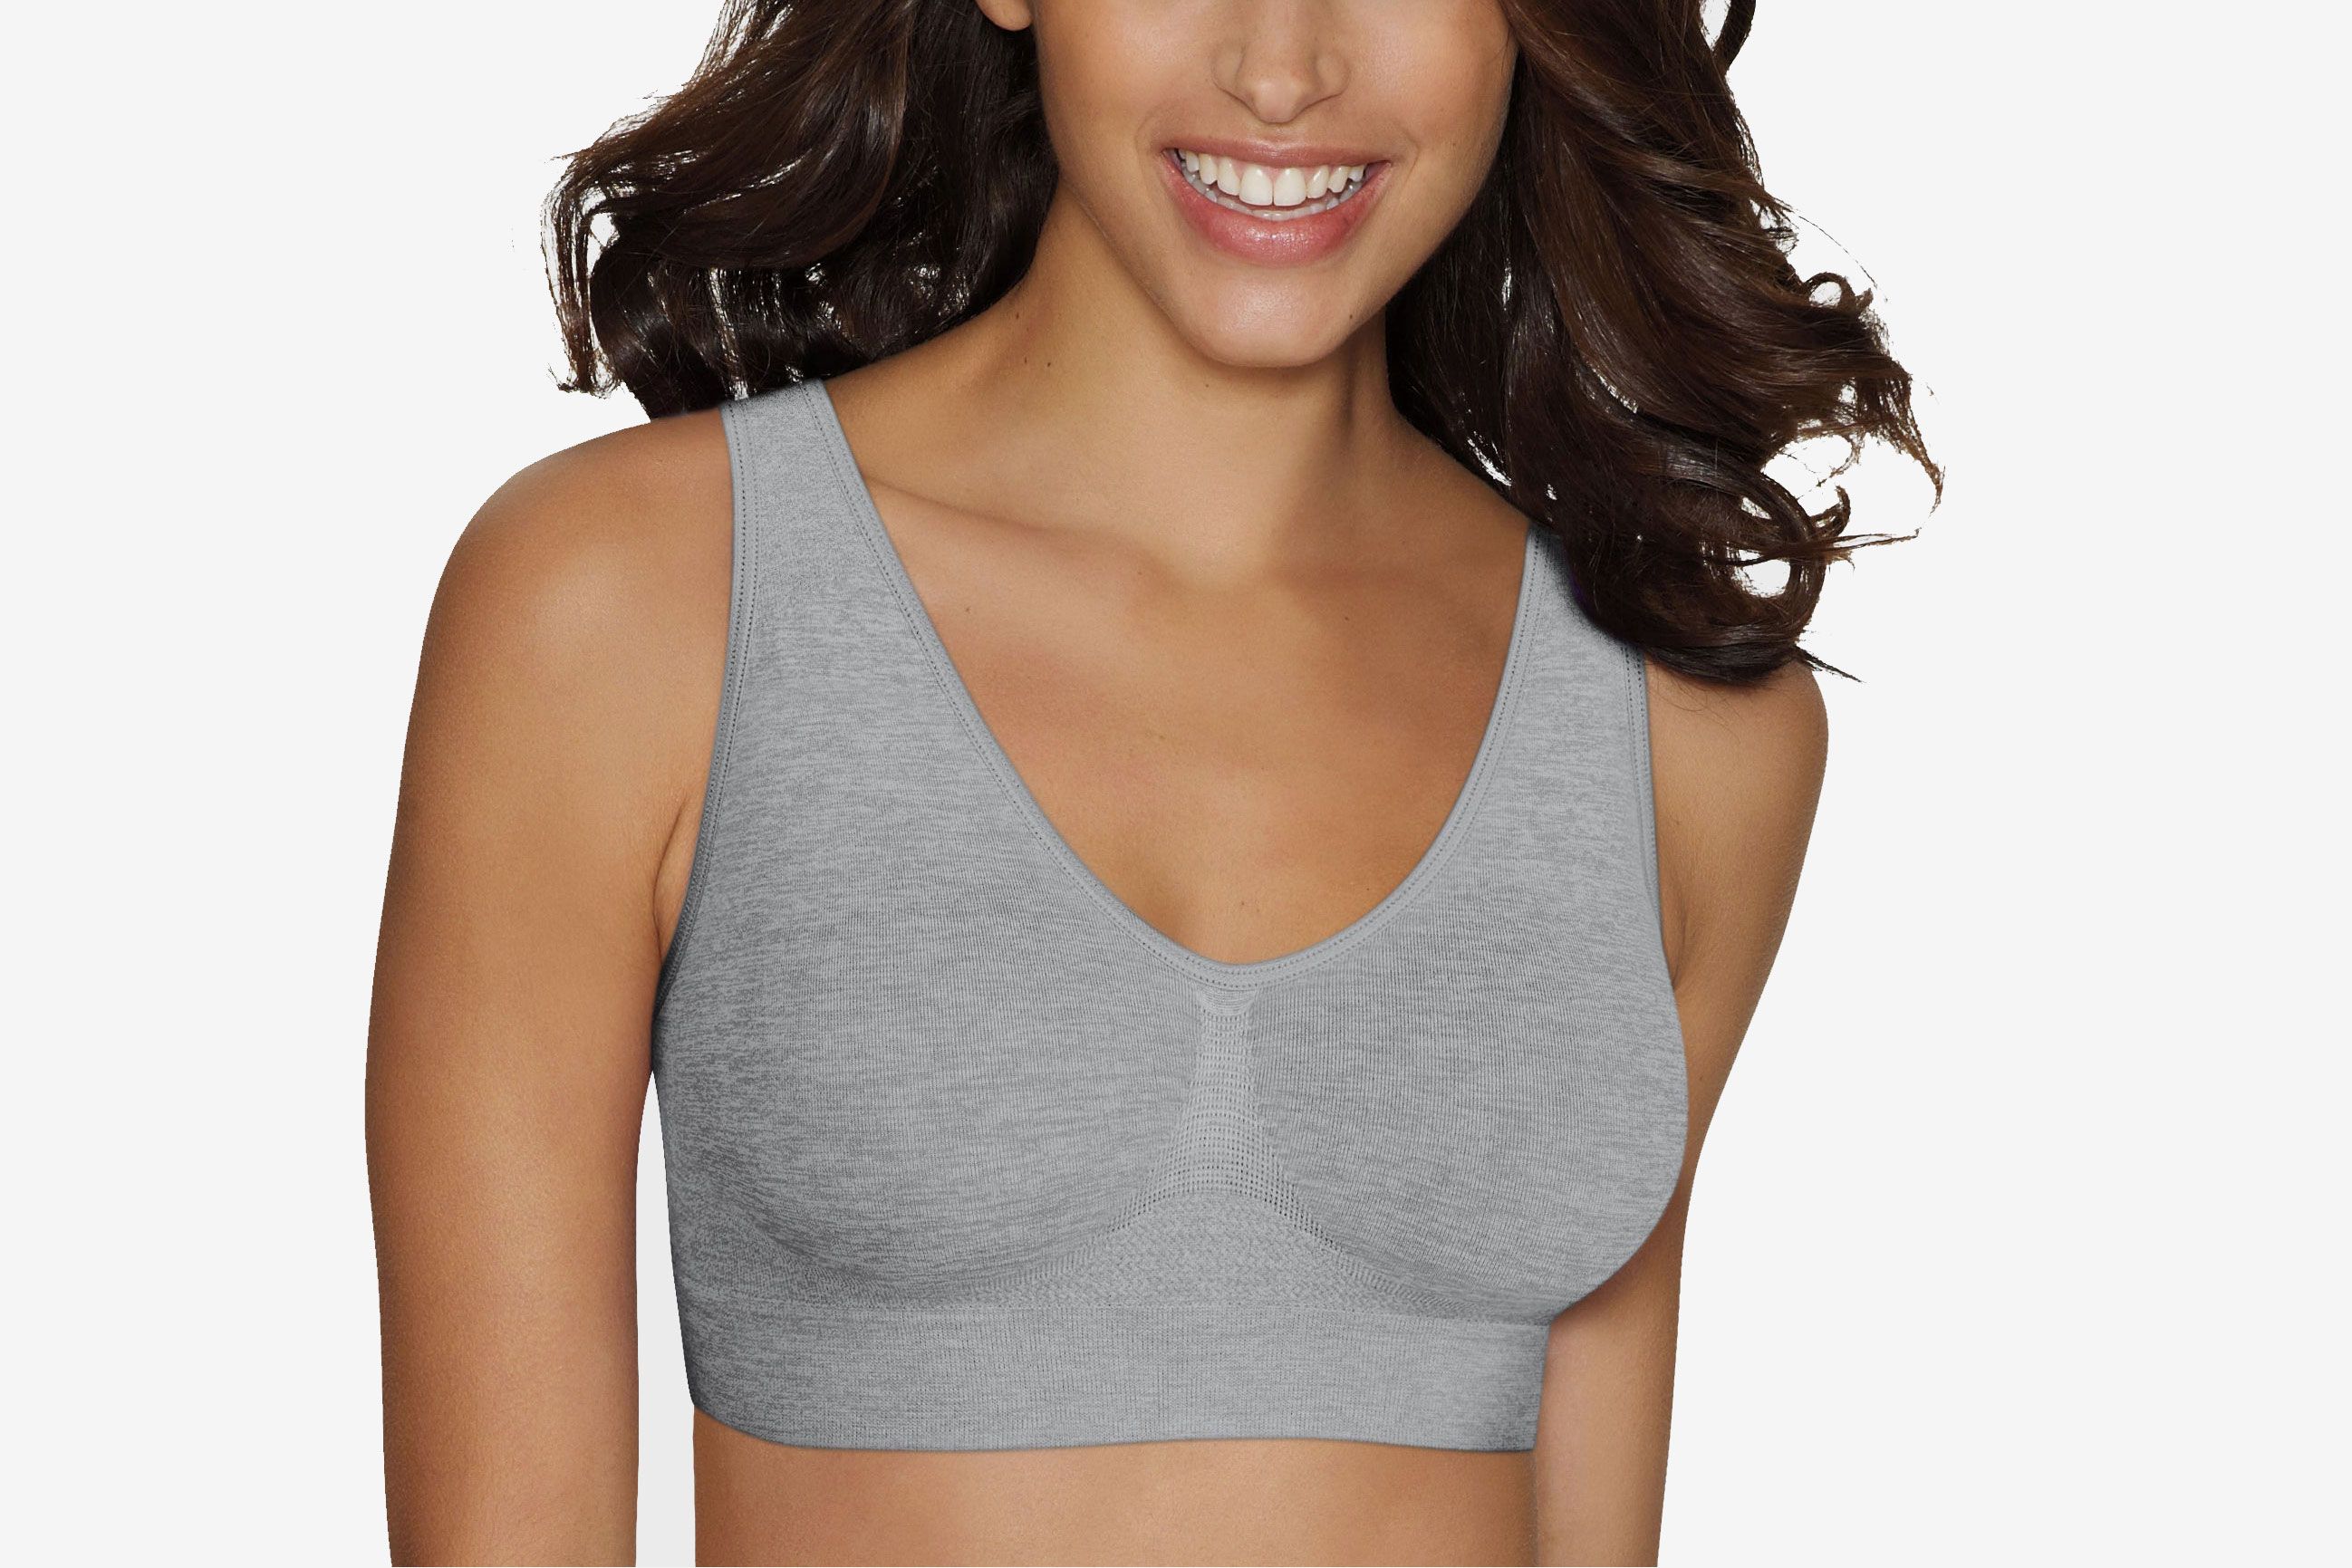 What are the Most Comfortable Bras for Athletic Br